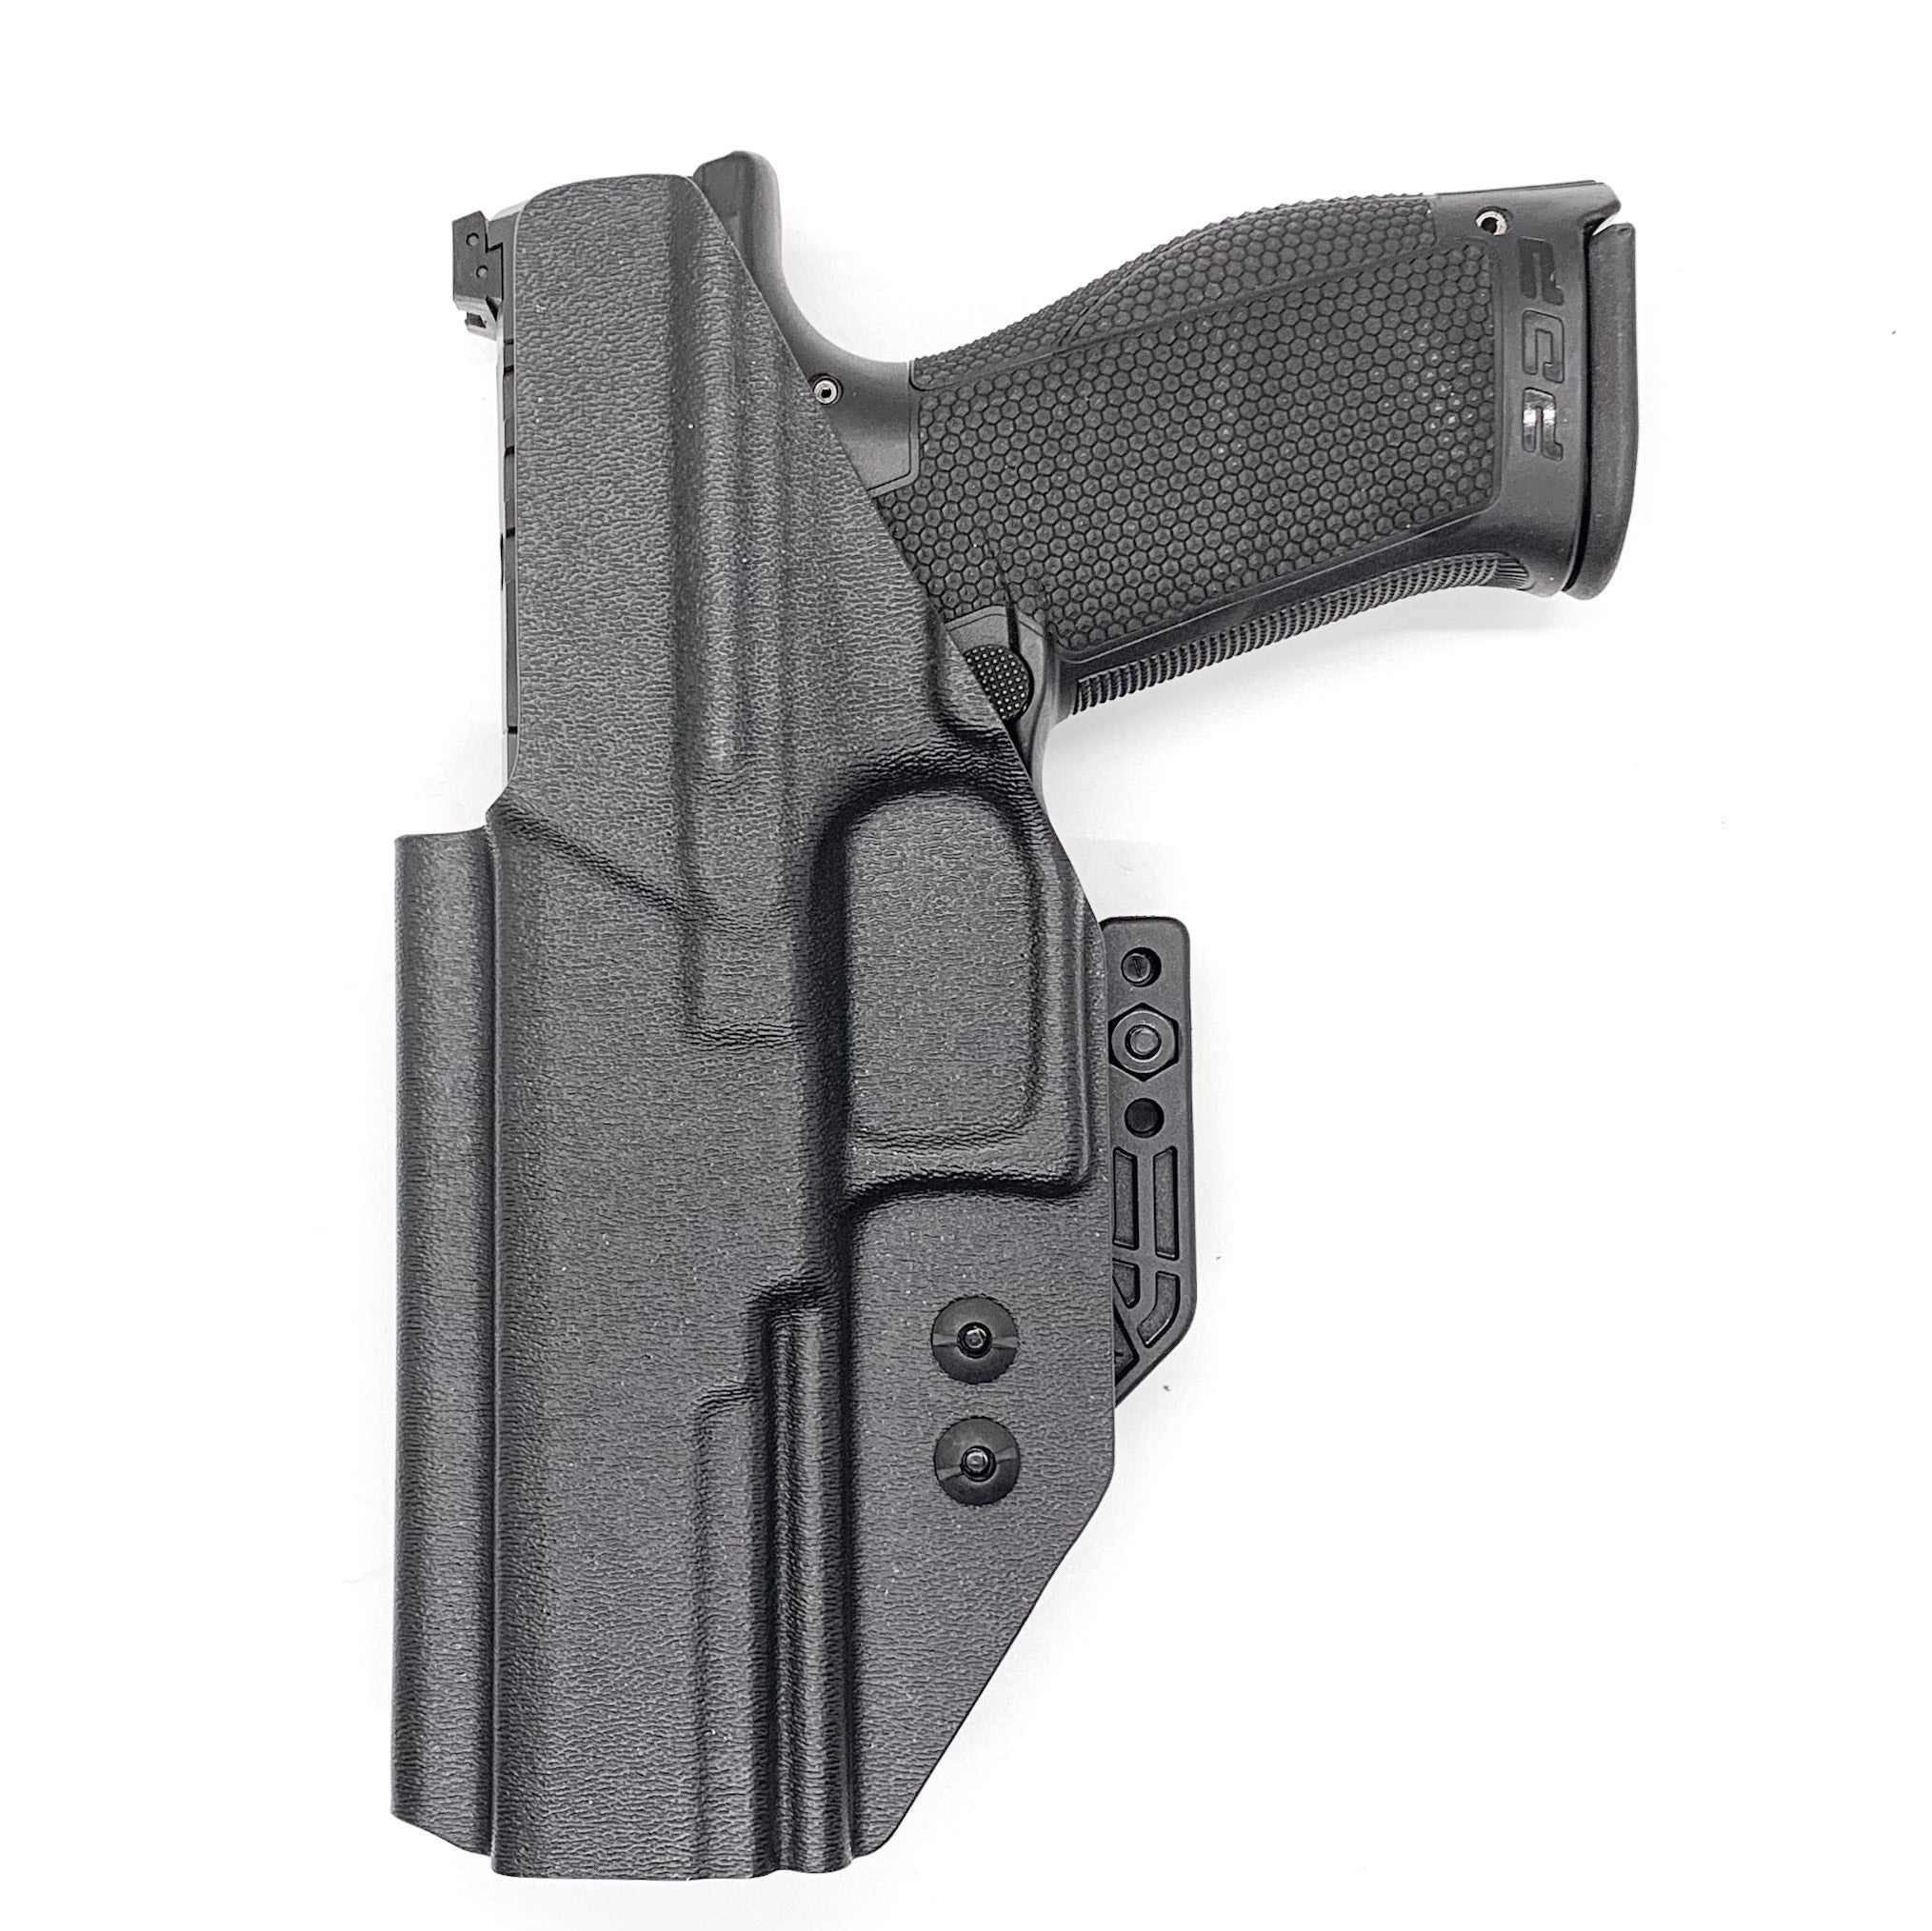 Inside Waistband IWB Holster designed to fit the Walther PDP Full Size 5" pistol. Holster profile is cut to allow red dot sights to be mounted on the pistol.  This holster will fit the Full Size 5" and 5" Compact. Full sweat guard, adjustable retention and open muzzle for threaded barrels and compensators.